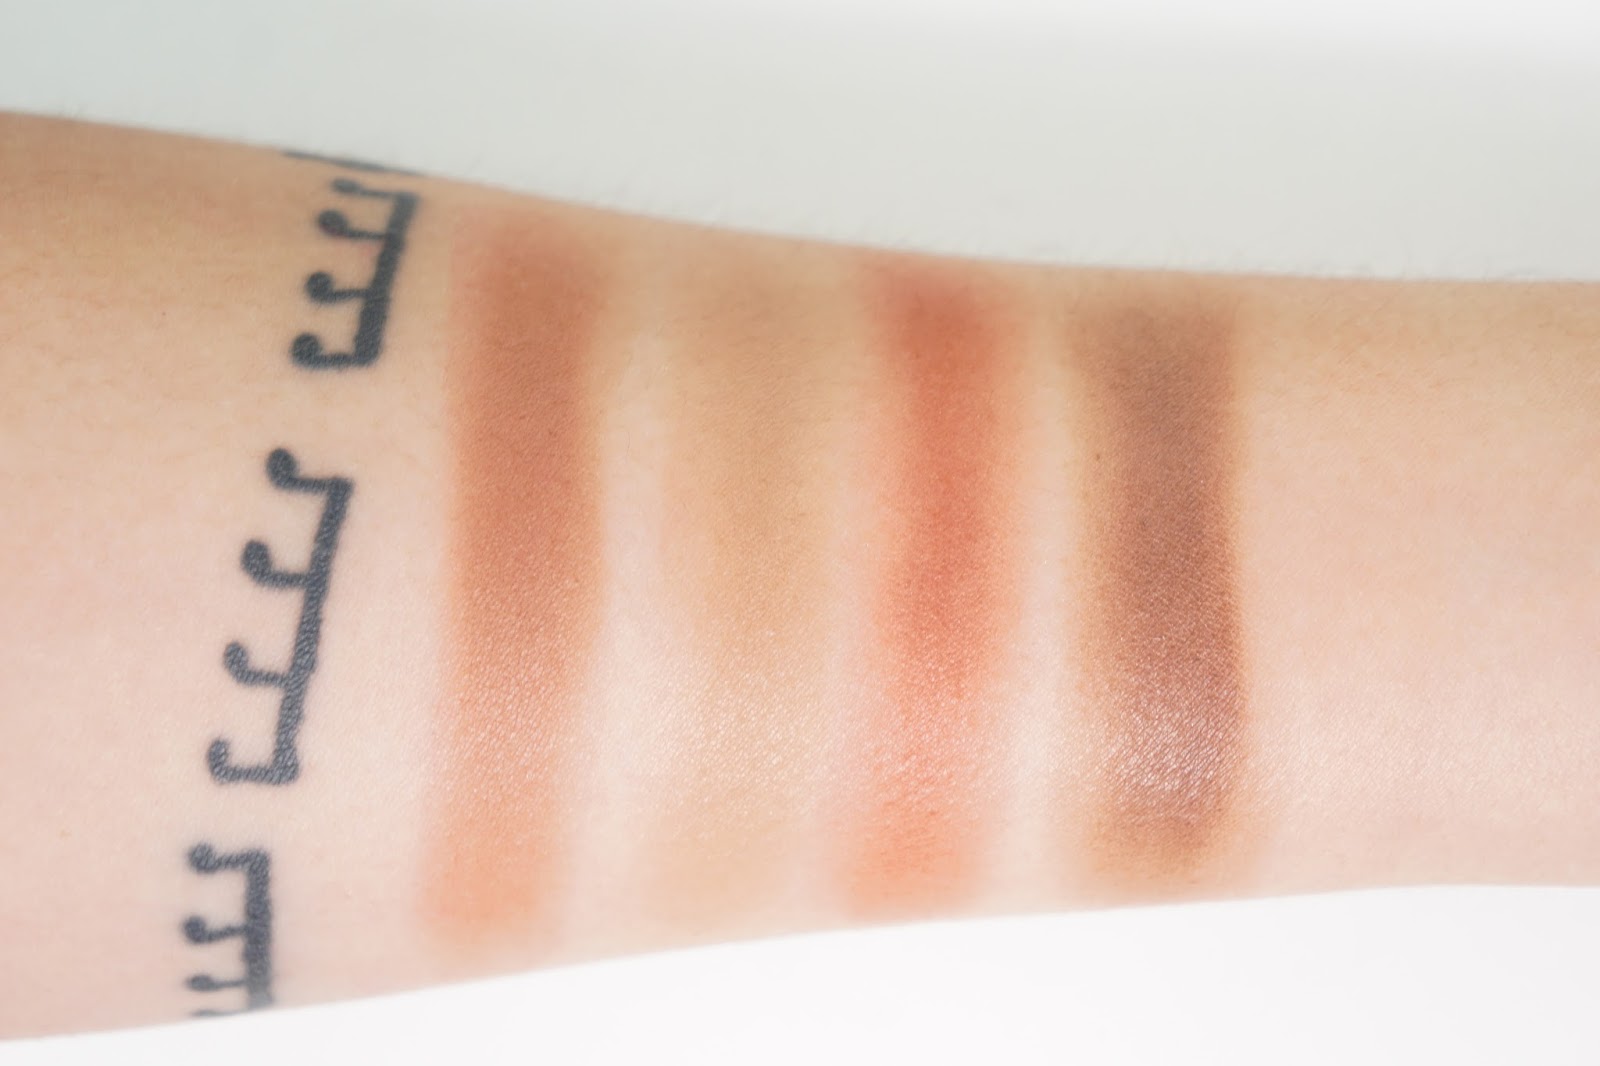 Review & Swatches: Chanel Les 4 Ombres in 268 Candeur et Experience, #Blogmas Day 3